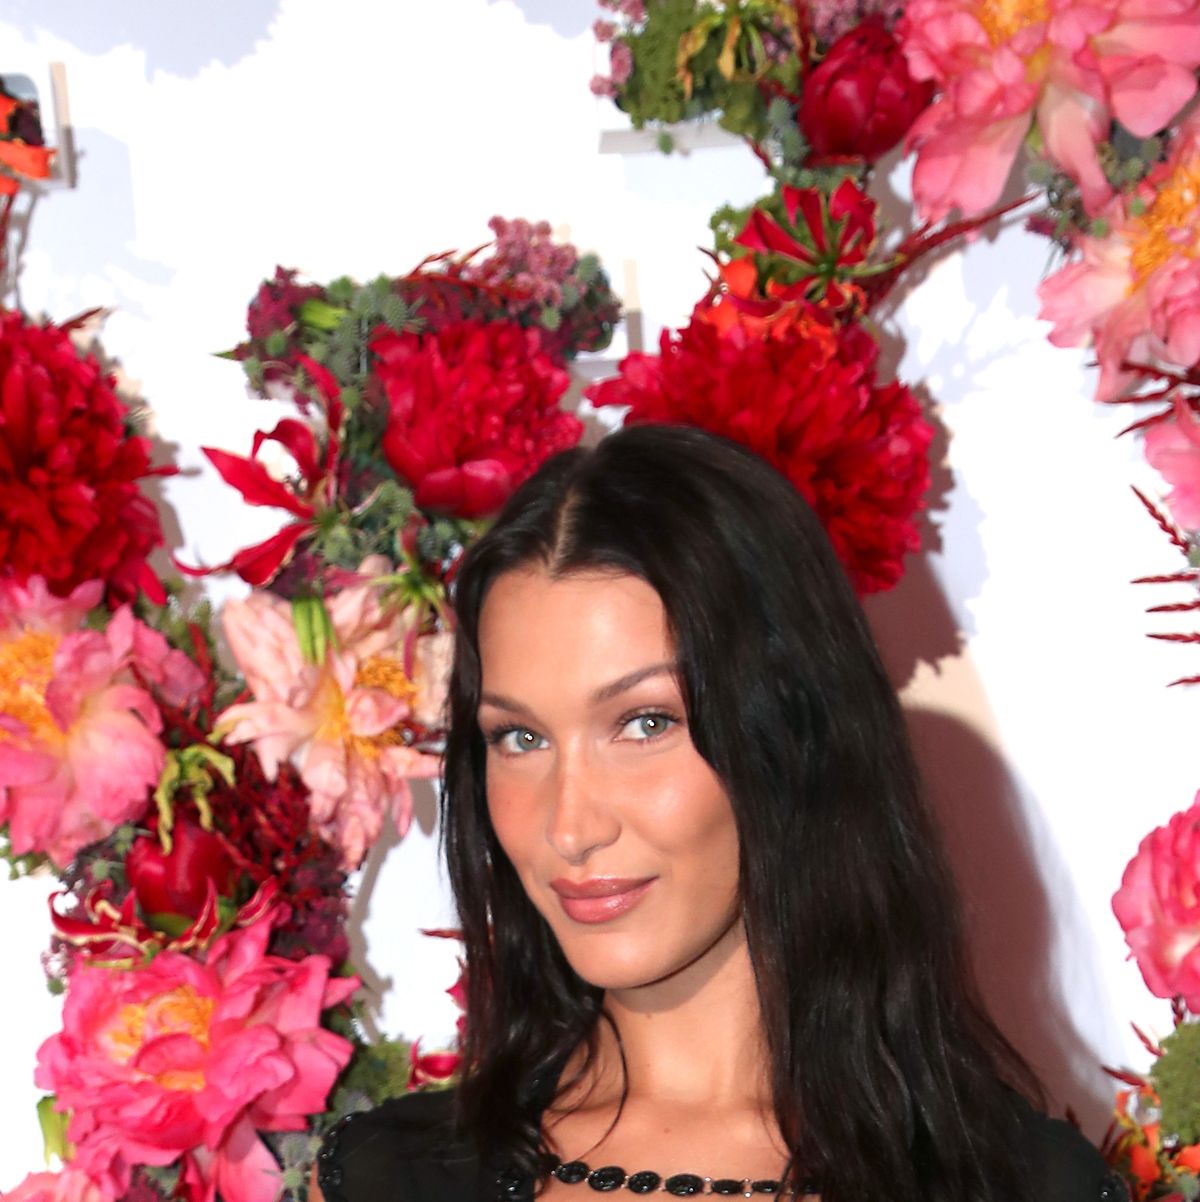 Florist Is The New York Brand Behind Bella Hadid's Favourite Bag